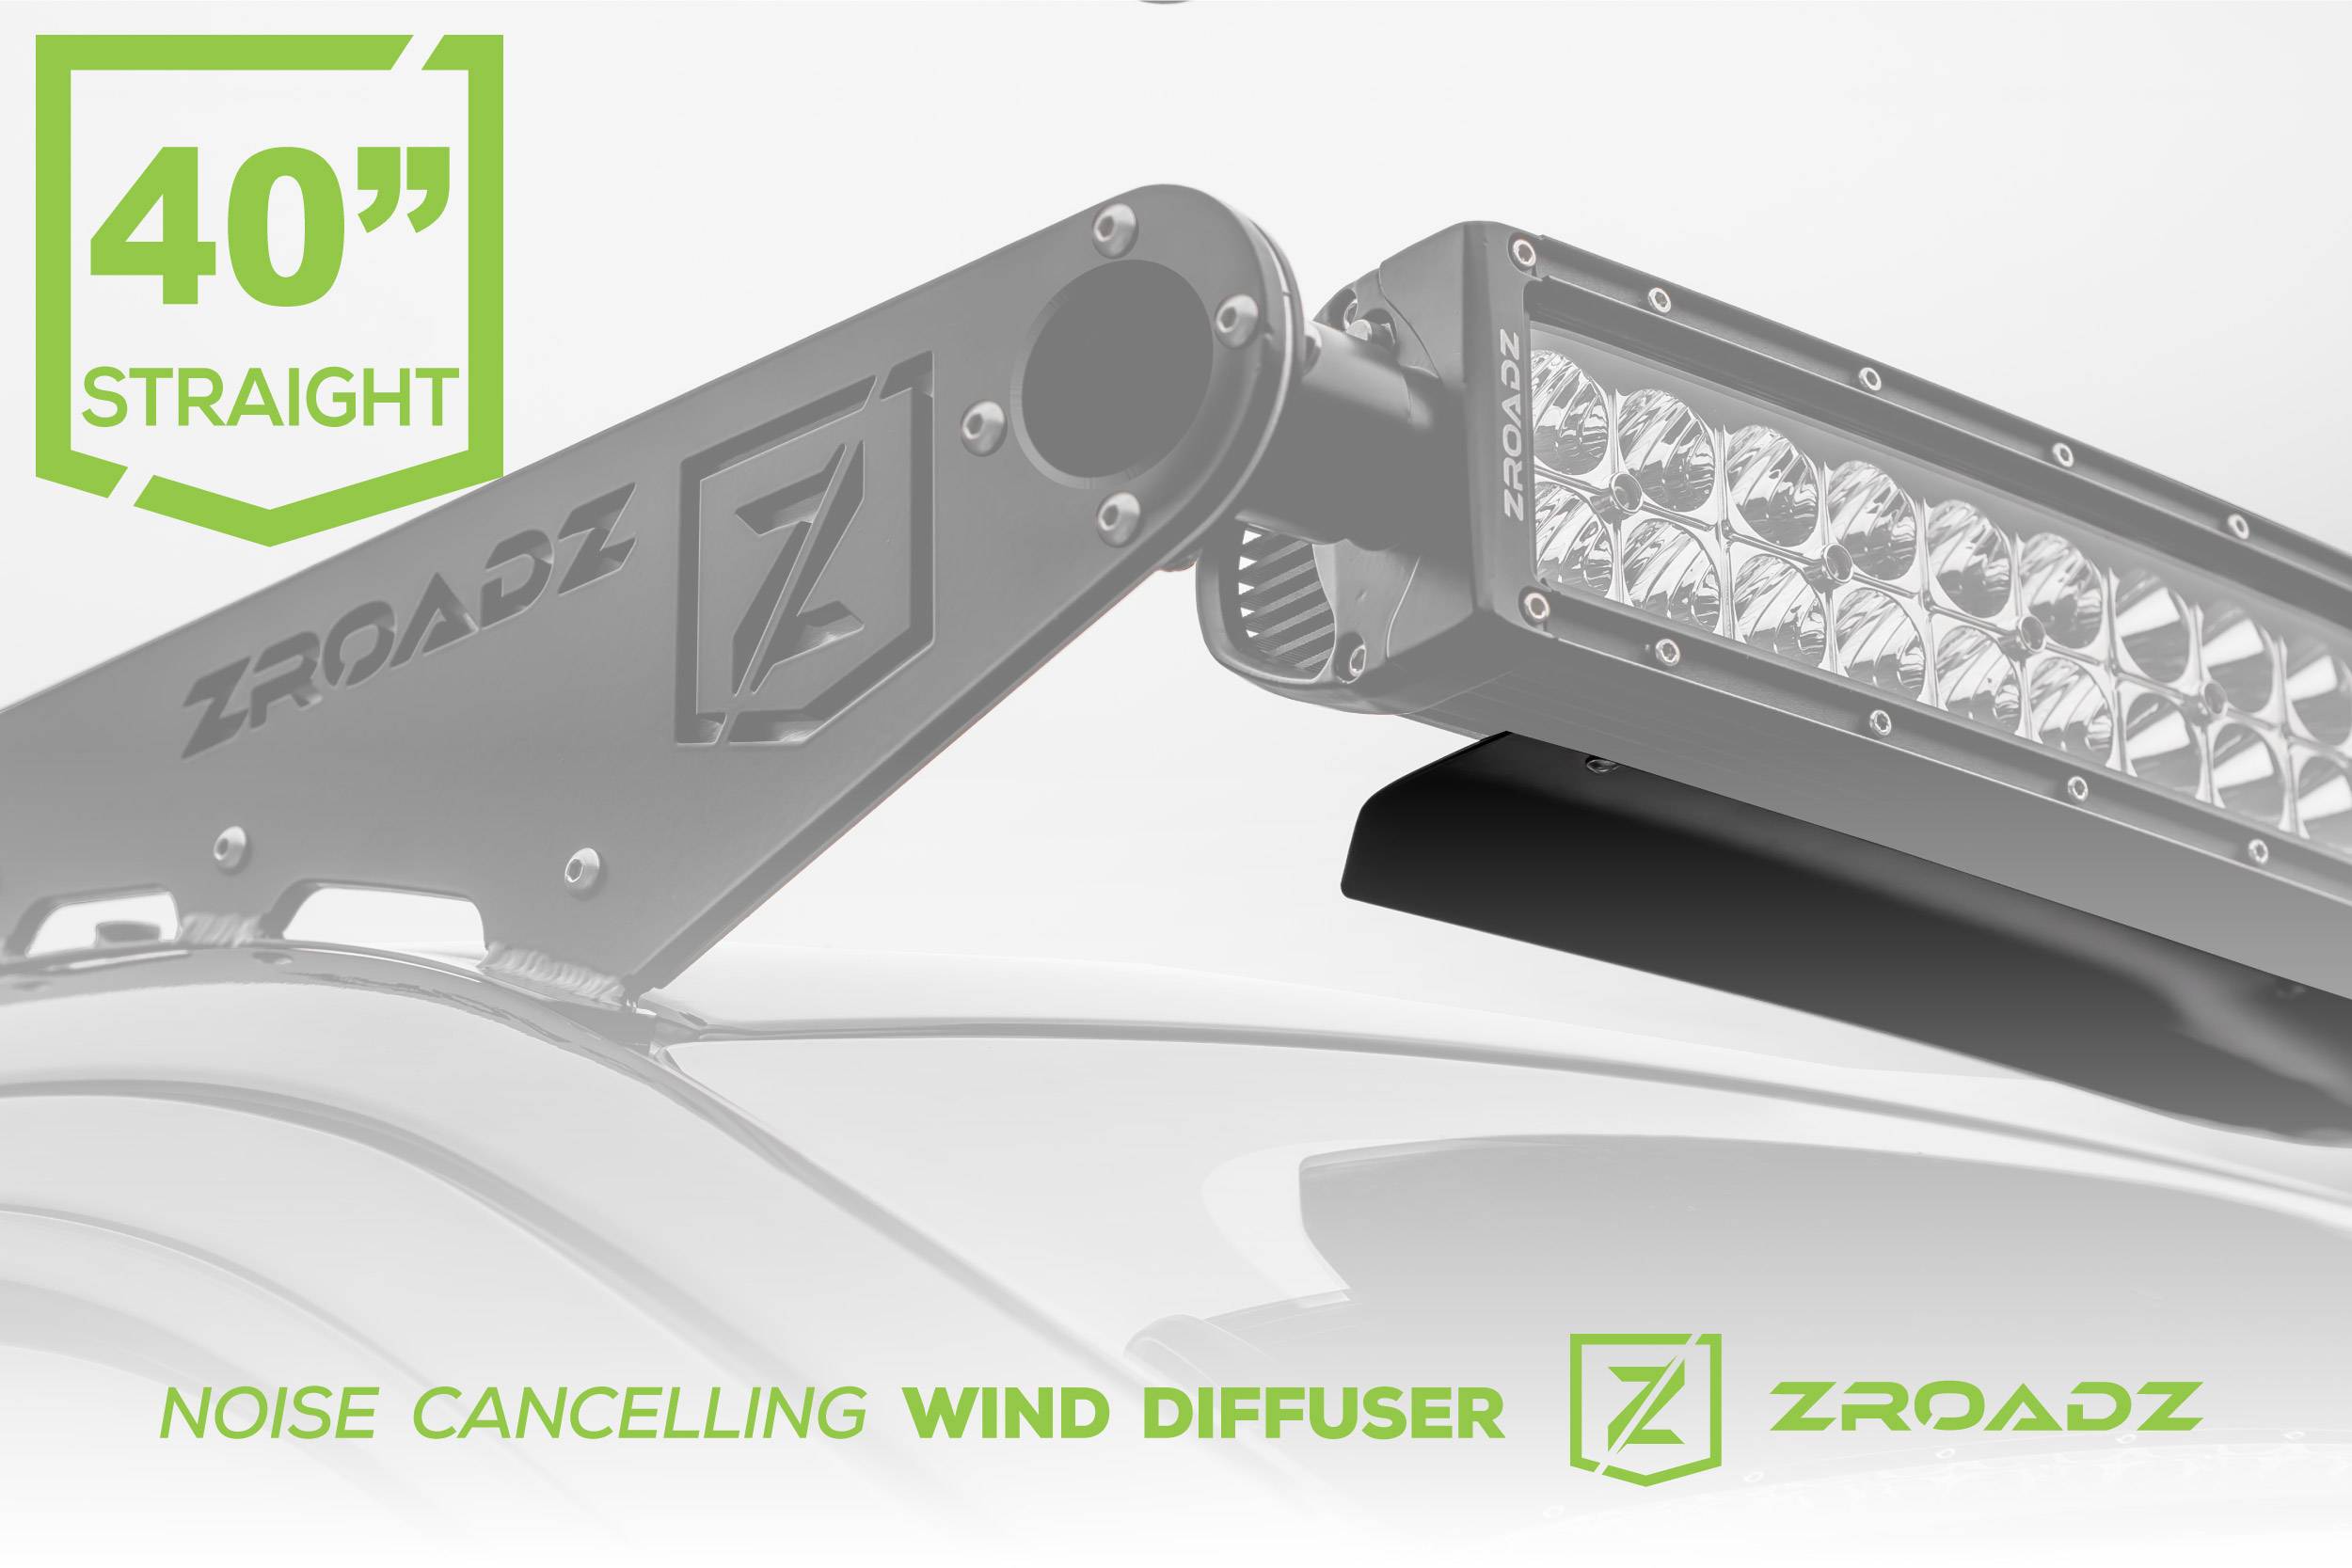 ZROADZ OFF ROAD PRODUCTS - Noise Cancelling Wind Diffuser for (1) 40 Inch Straight LED Light Bar - PN #Z330040S